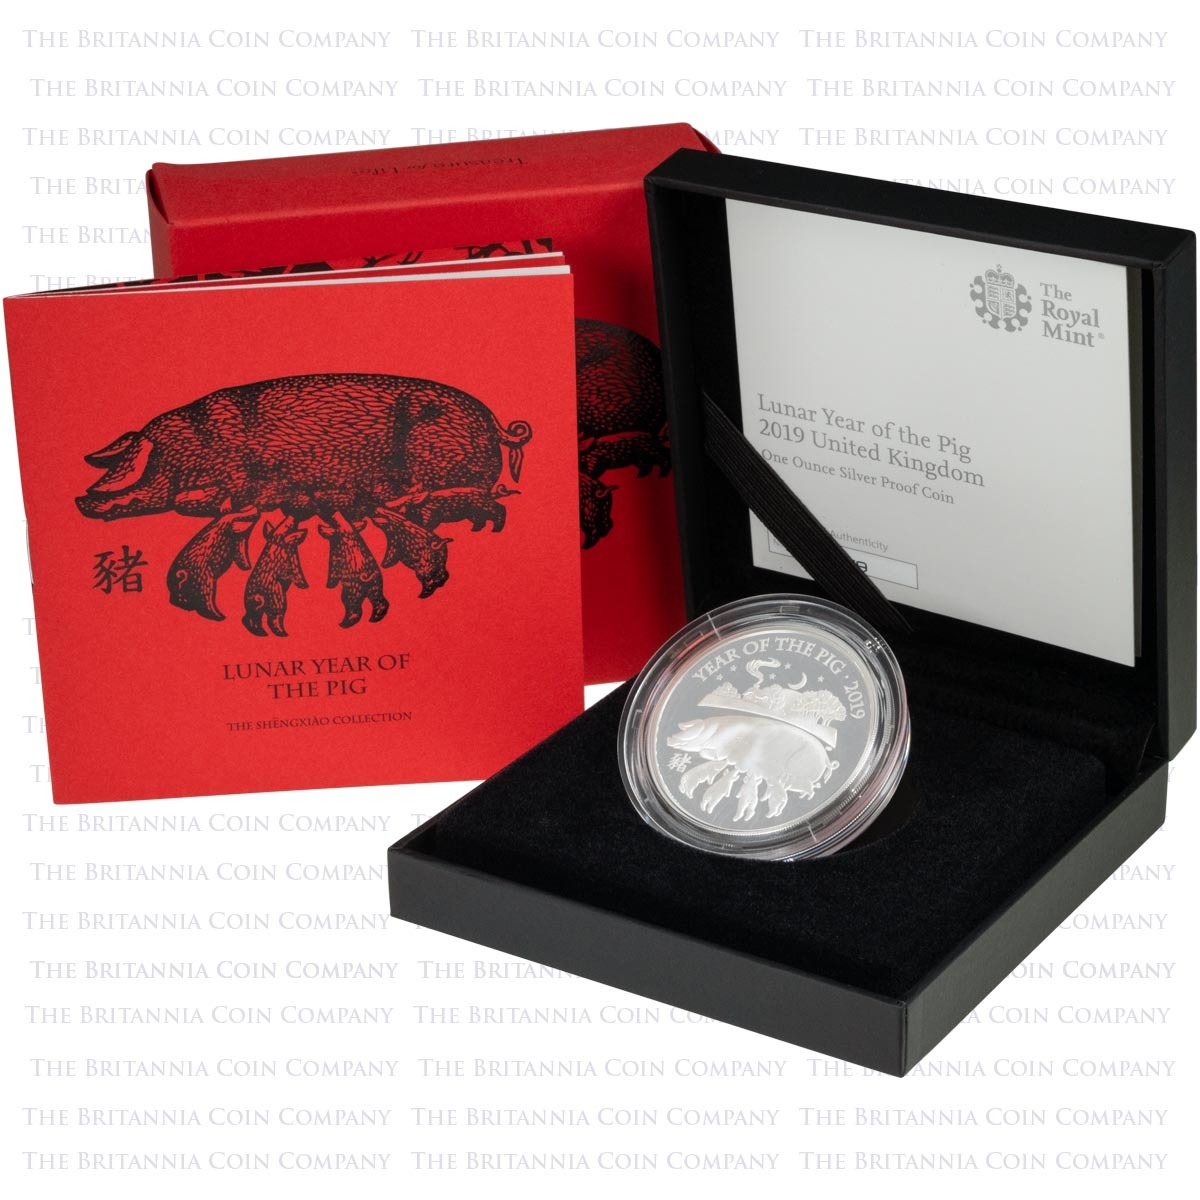 UKP19SP 2019 Lunar Year Of The Pig One Ounce Silver Proof Coin Boxed